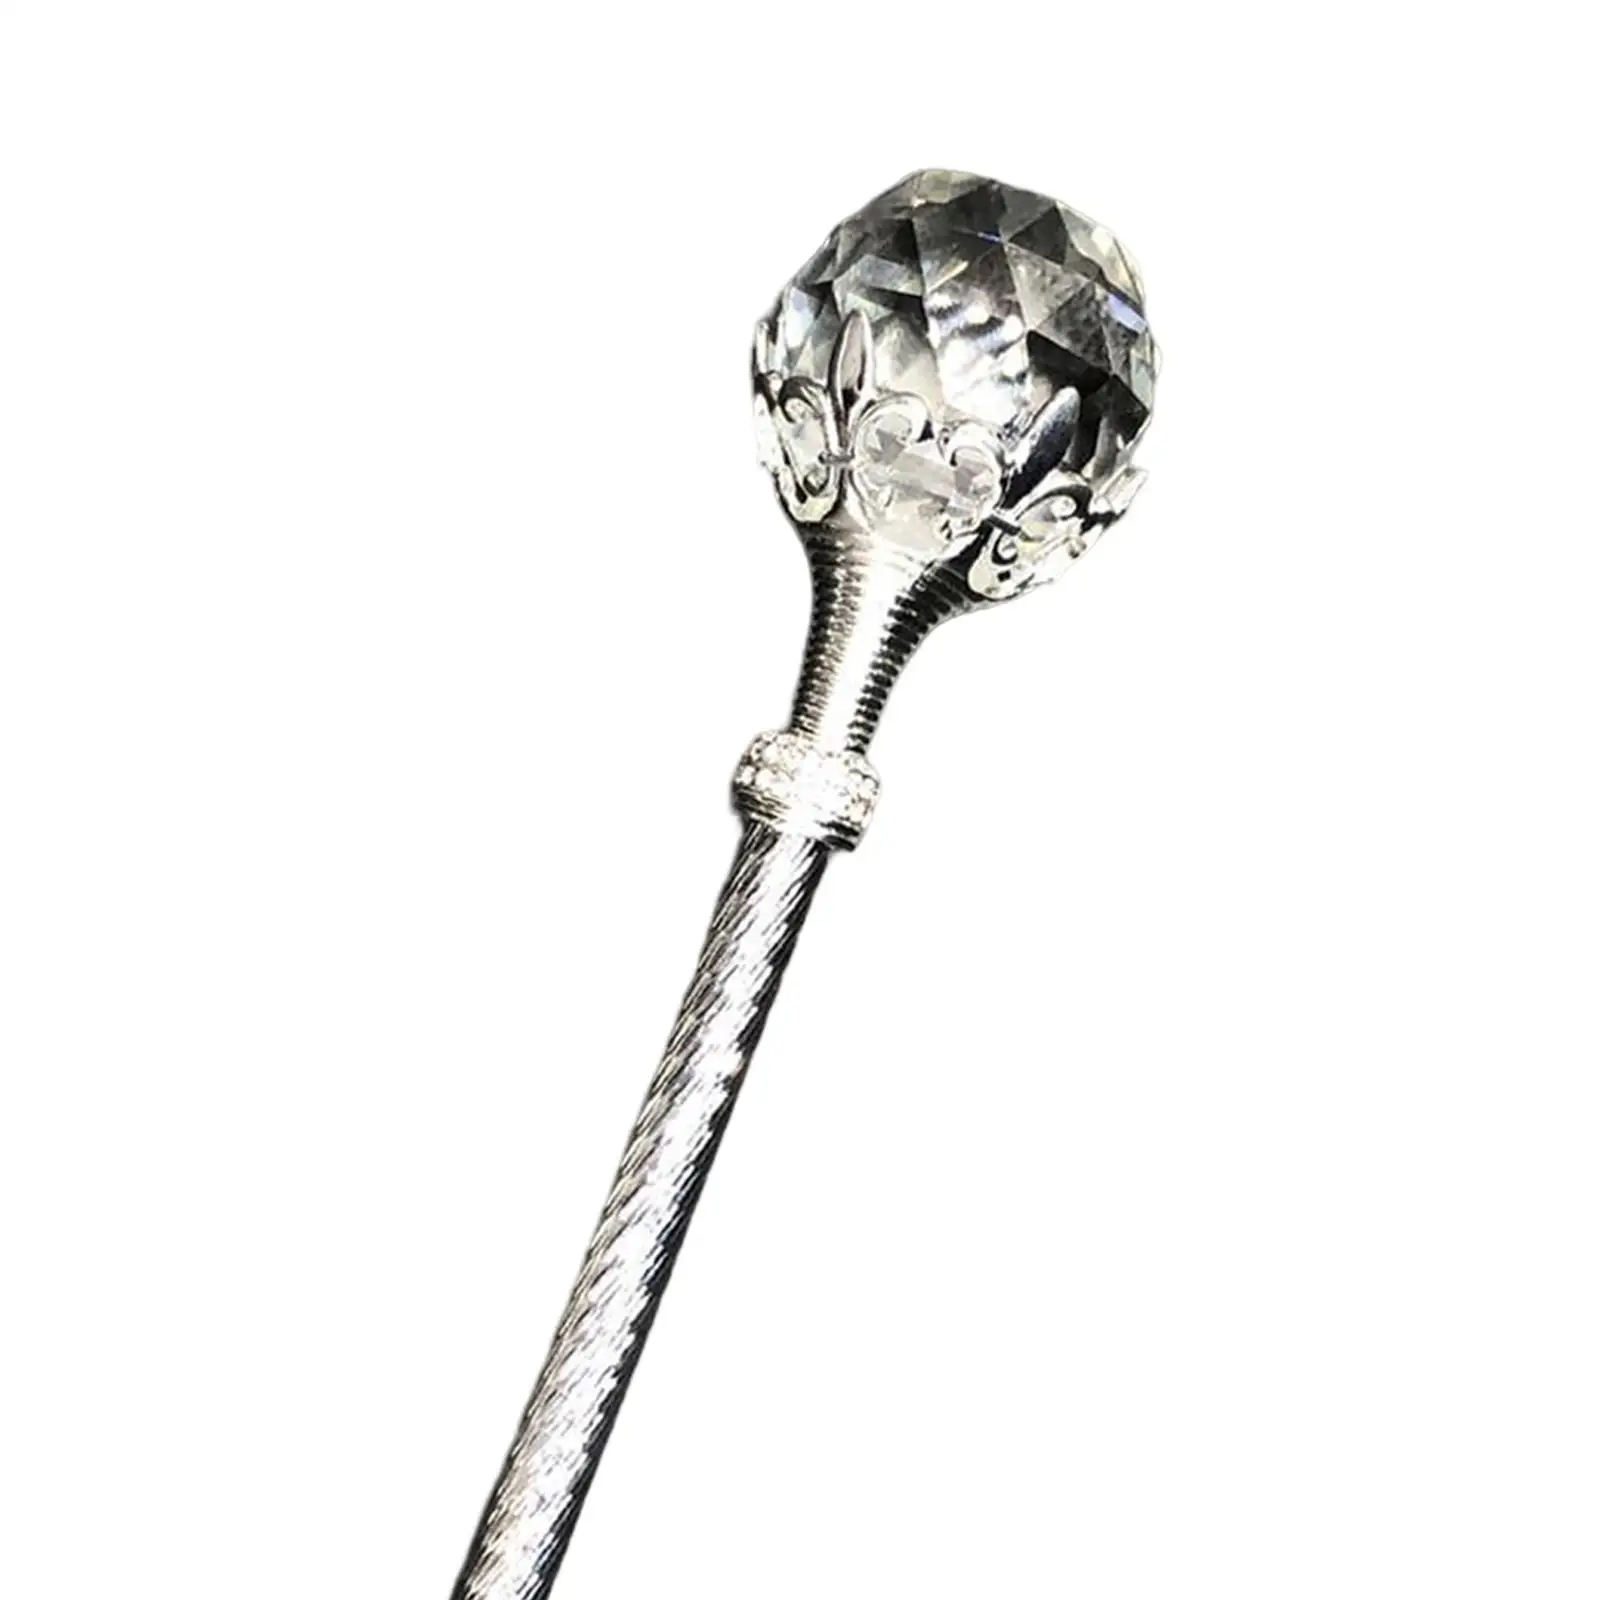 Queen Scepter Wand Fairy Crystal Ball  Wand Princess Scepter Cane Props for Prom Stage Party Kids Costume Decorations